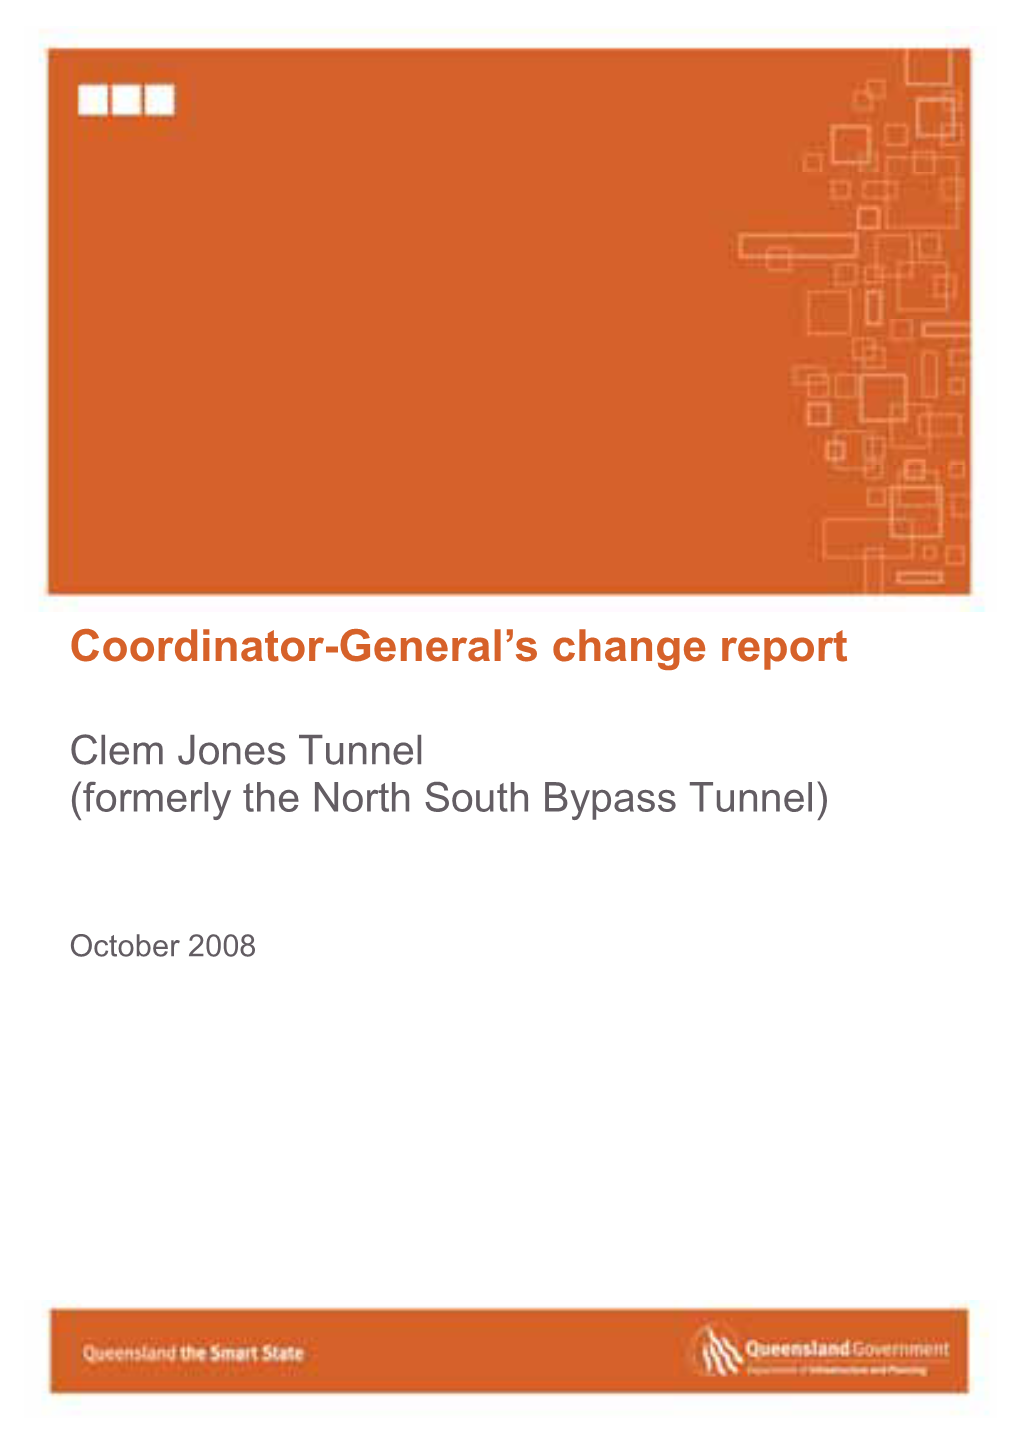 Clem Jones Tunnel (Formerly the North South Bypass Tunnel)